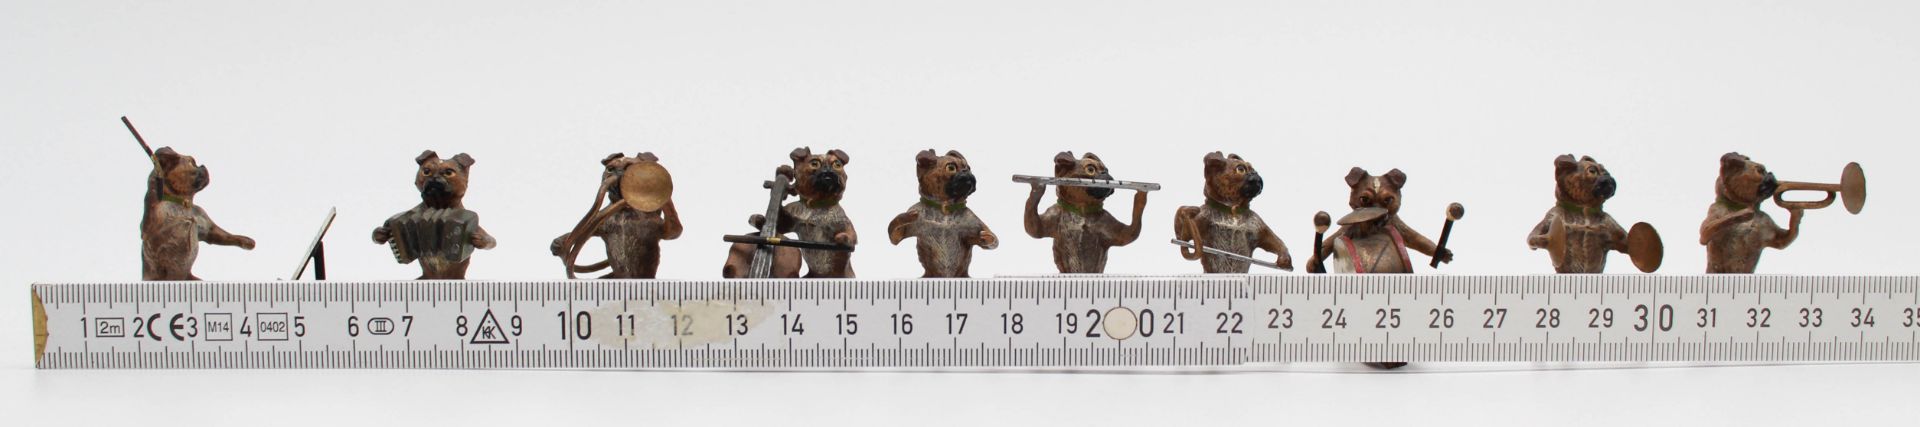 Dog band. 10 small bronzes. Cold painted. Vienna? Up to 4.5 cm high. - Image 15 of 22